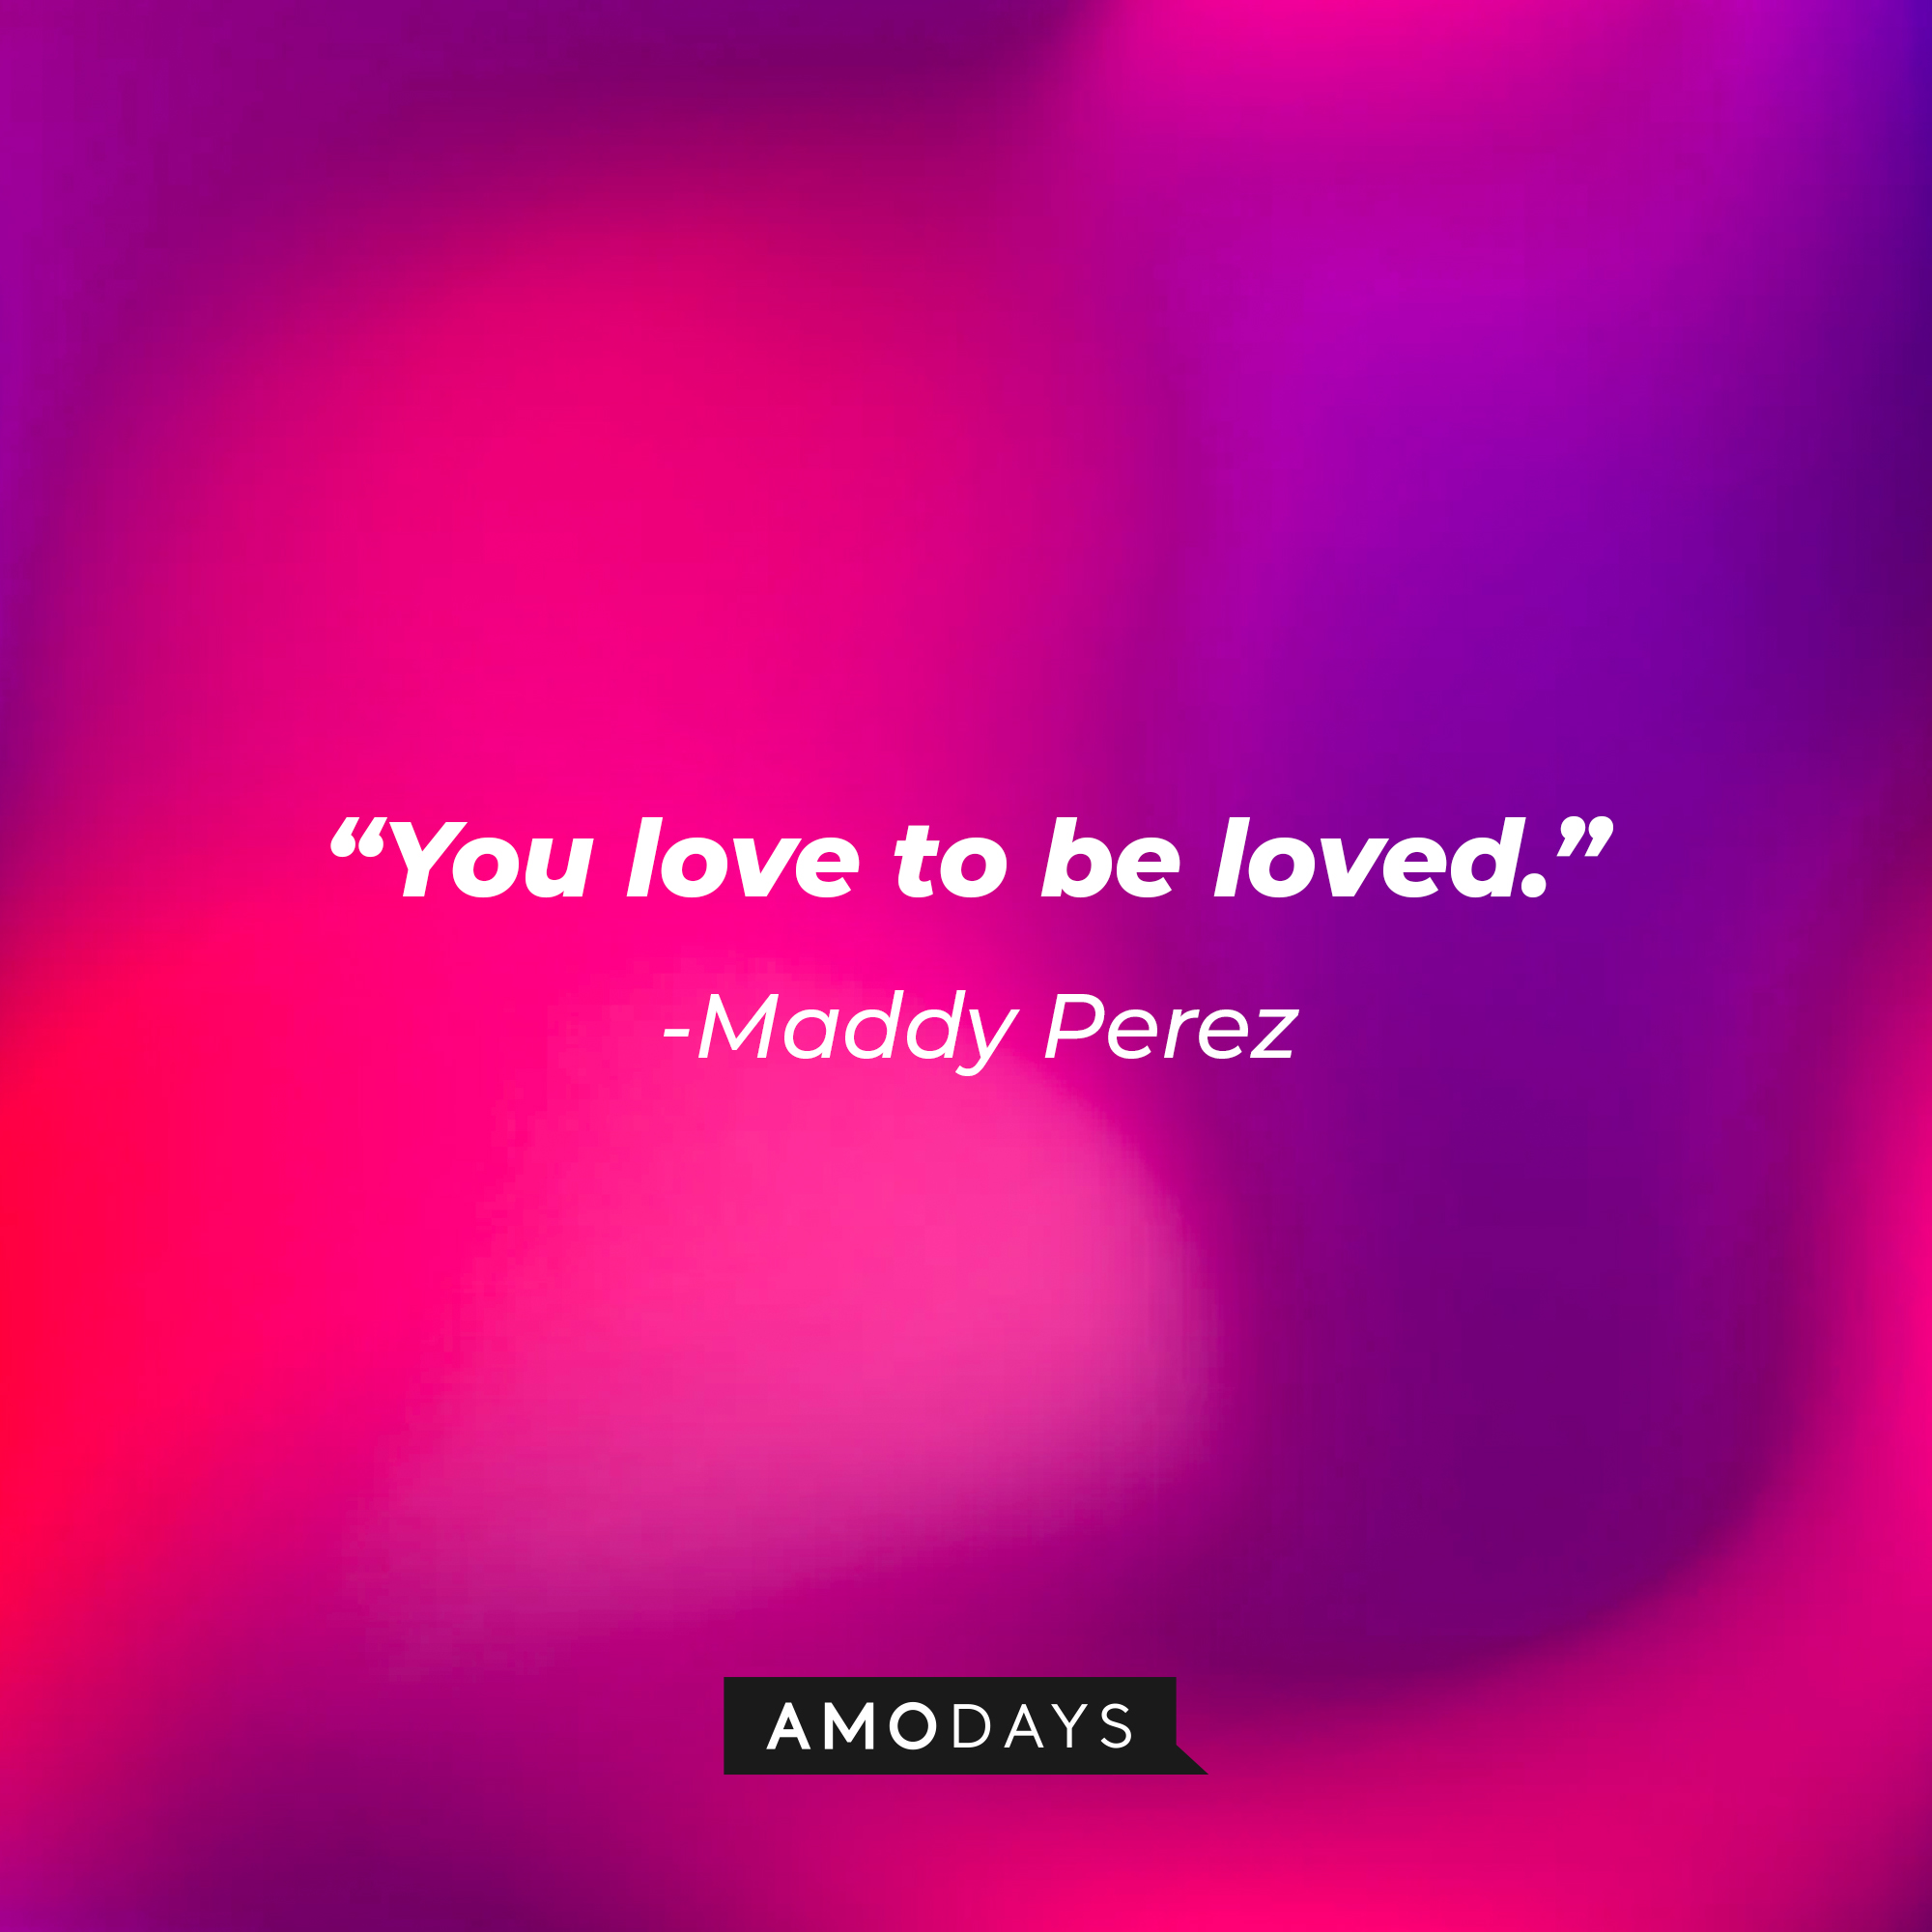 Maddy Perez’ quote: “You love to be loved.” | Source: AmoDays